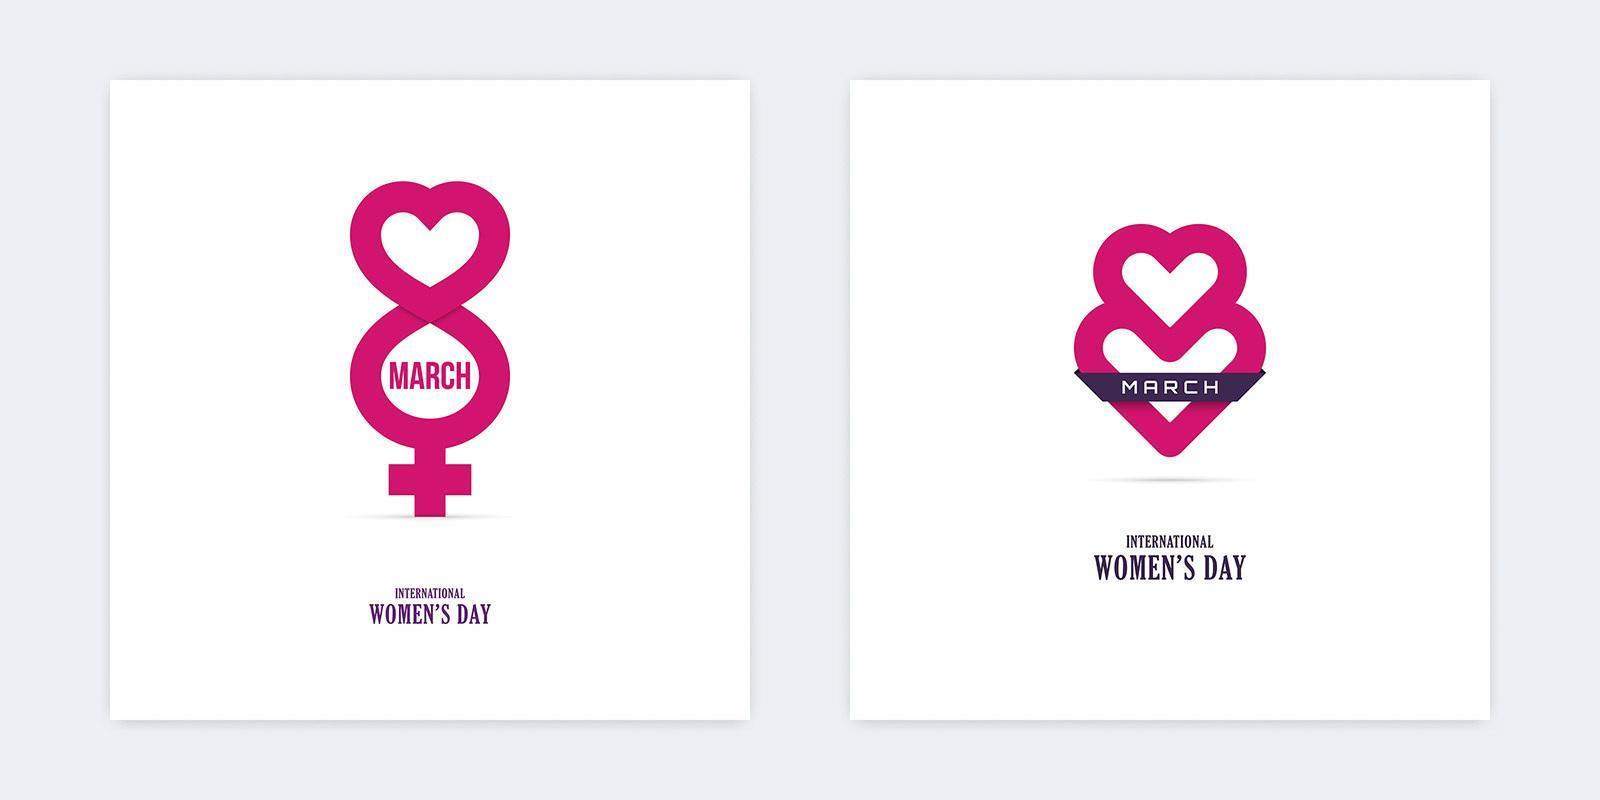 8 March Icons with Heart Shapes vector